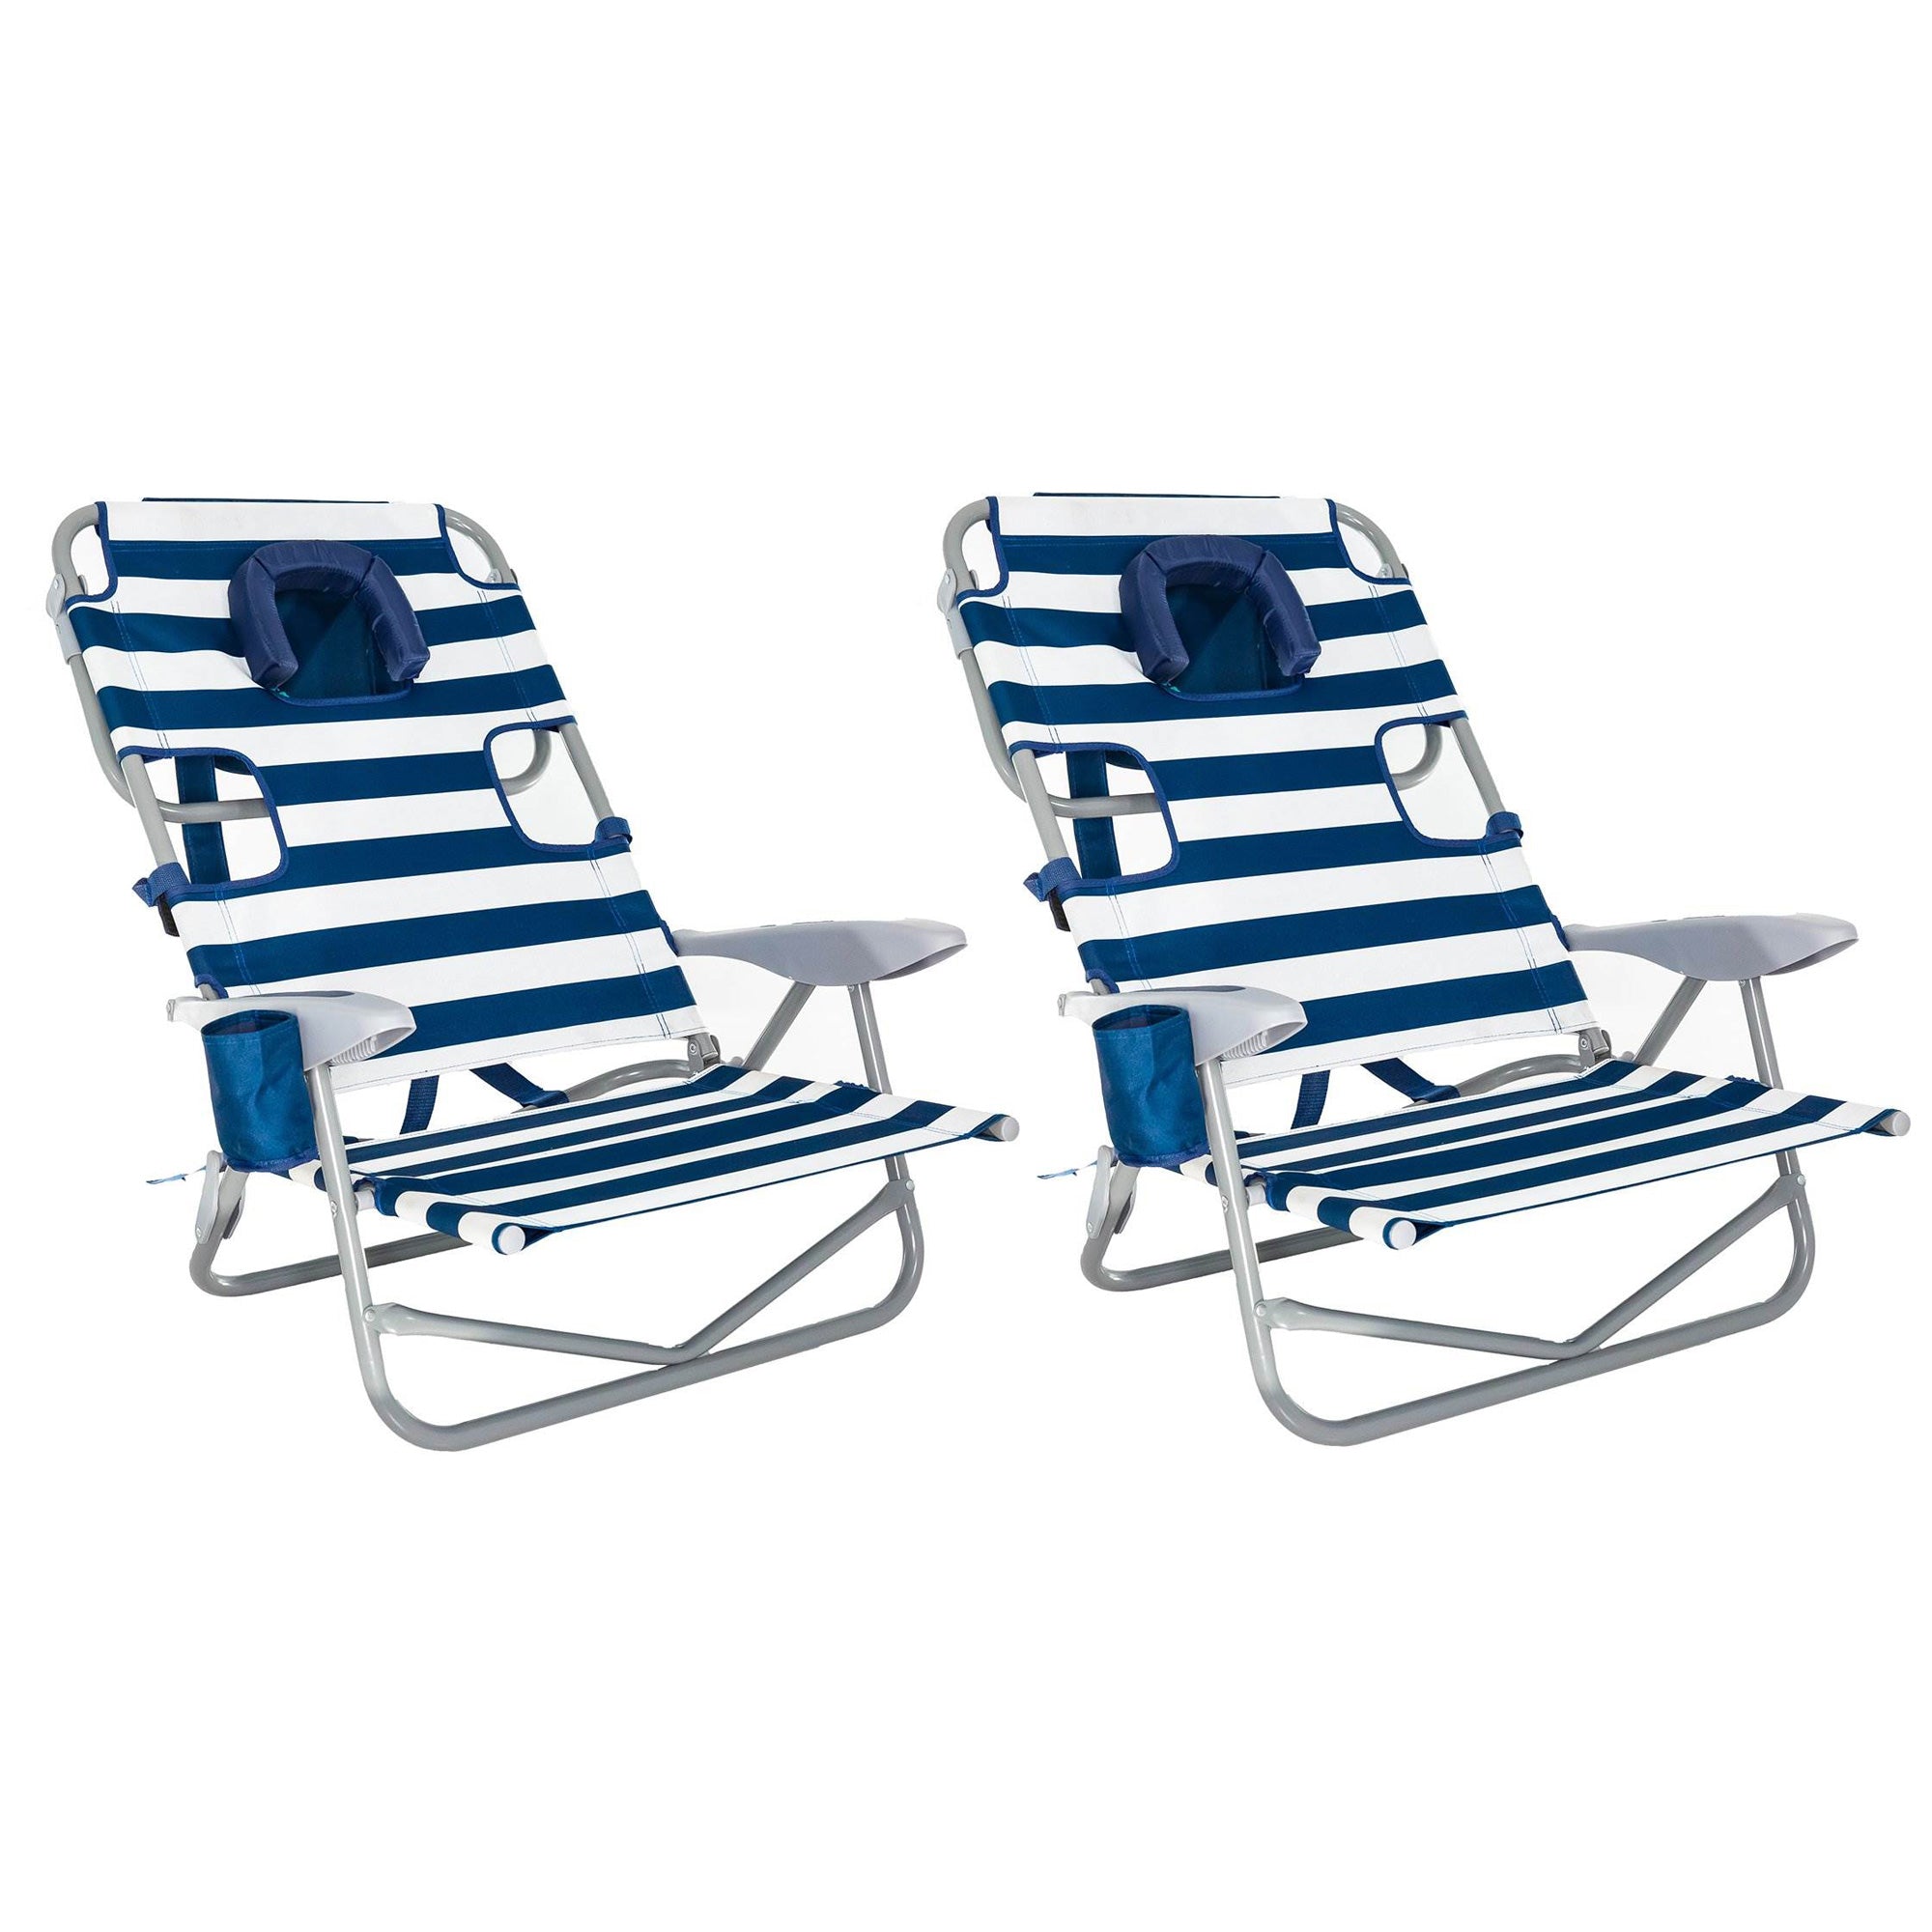 Ostrich-On-Your-Back-Outdoor-Lounge-5-Position-Recline-Beach-Chair-(2-Pack)-Chairs-&-Seating